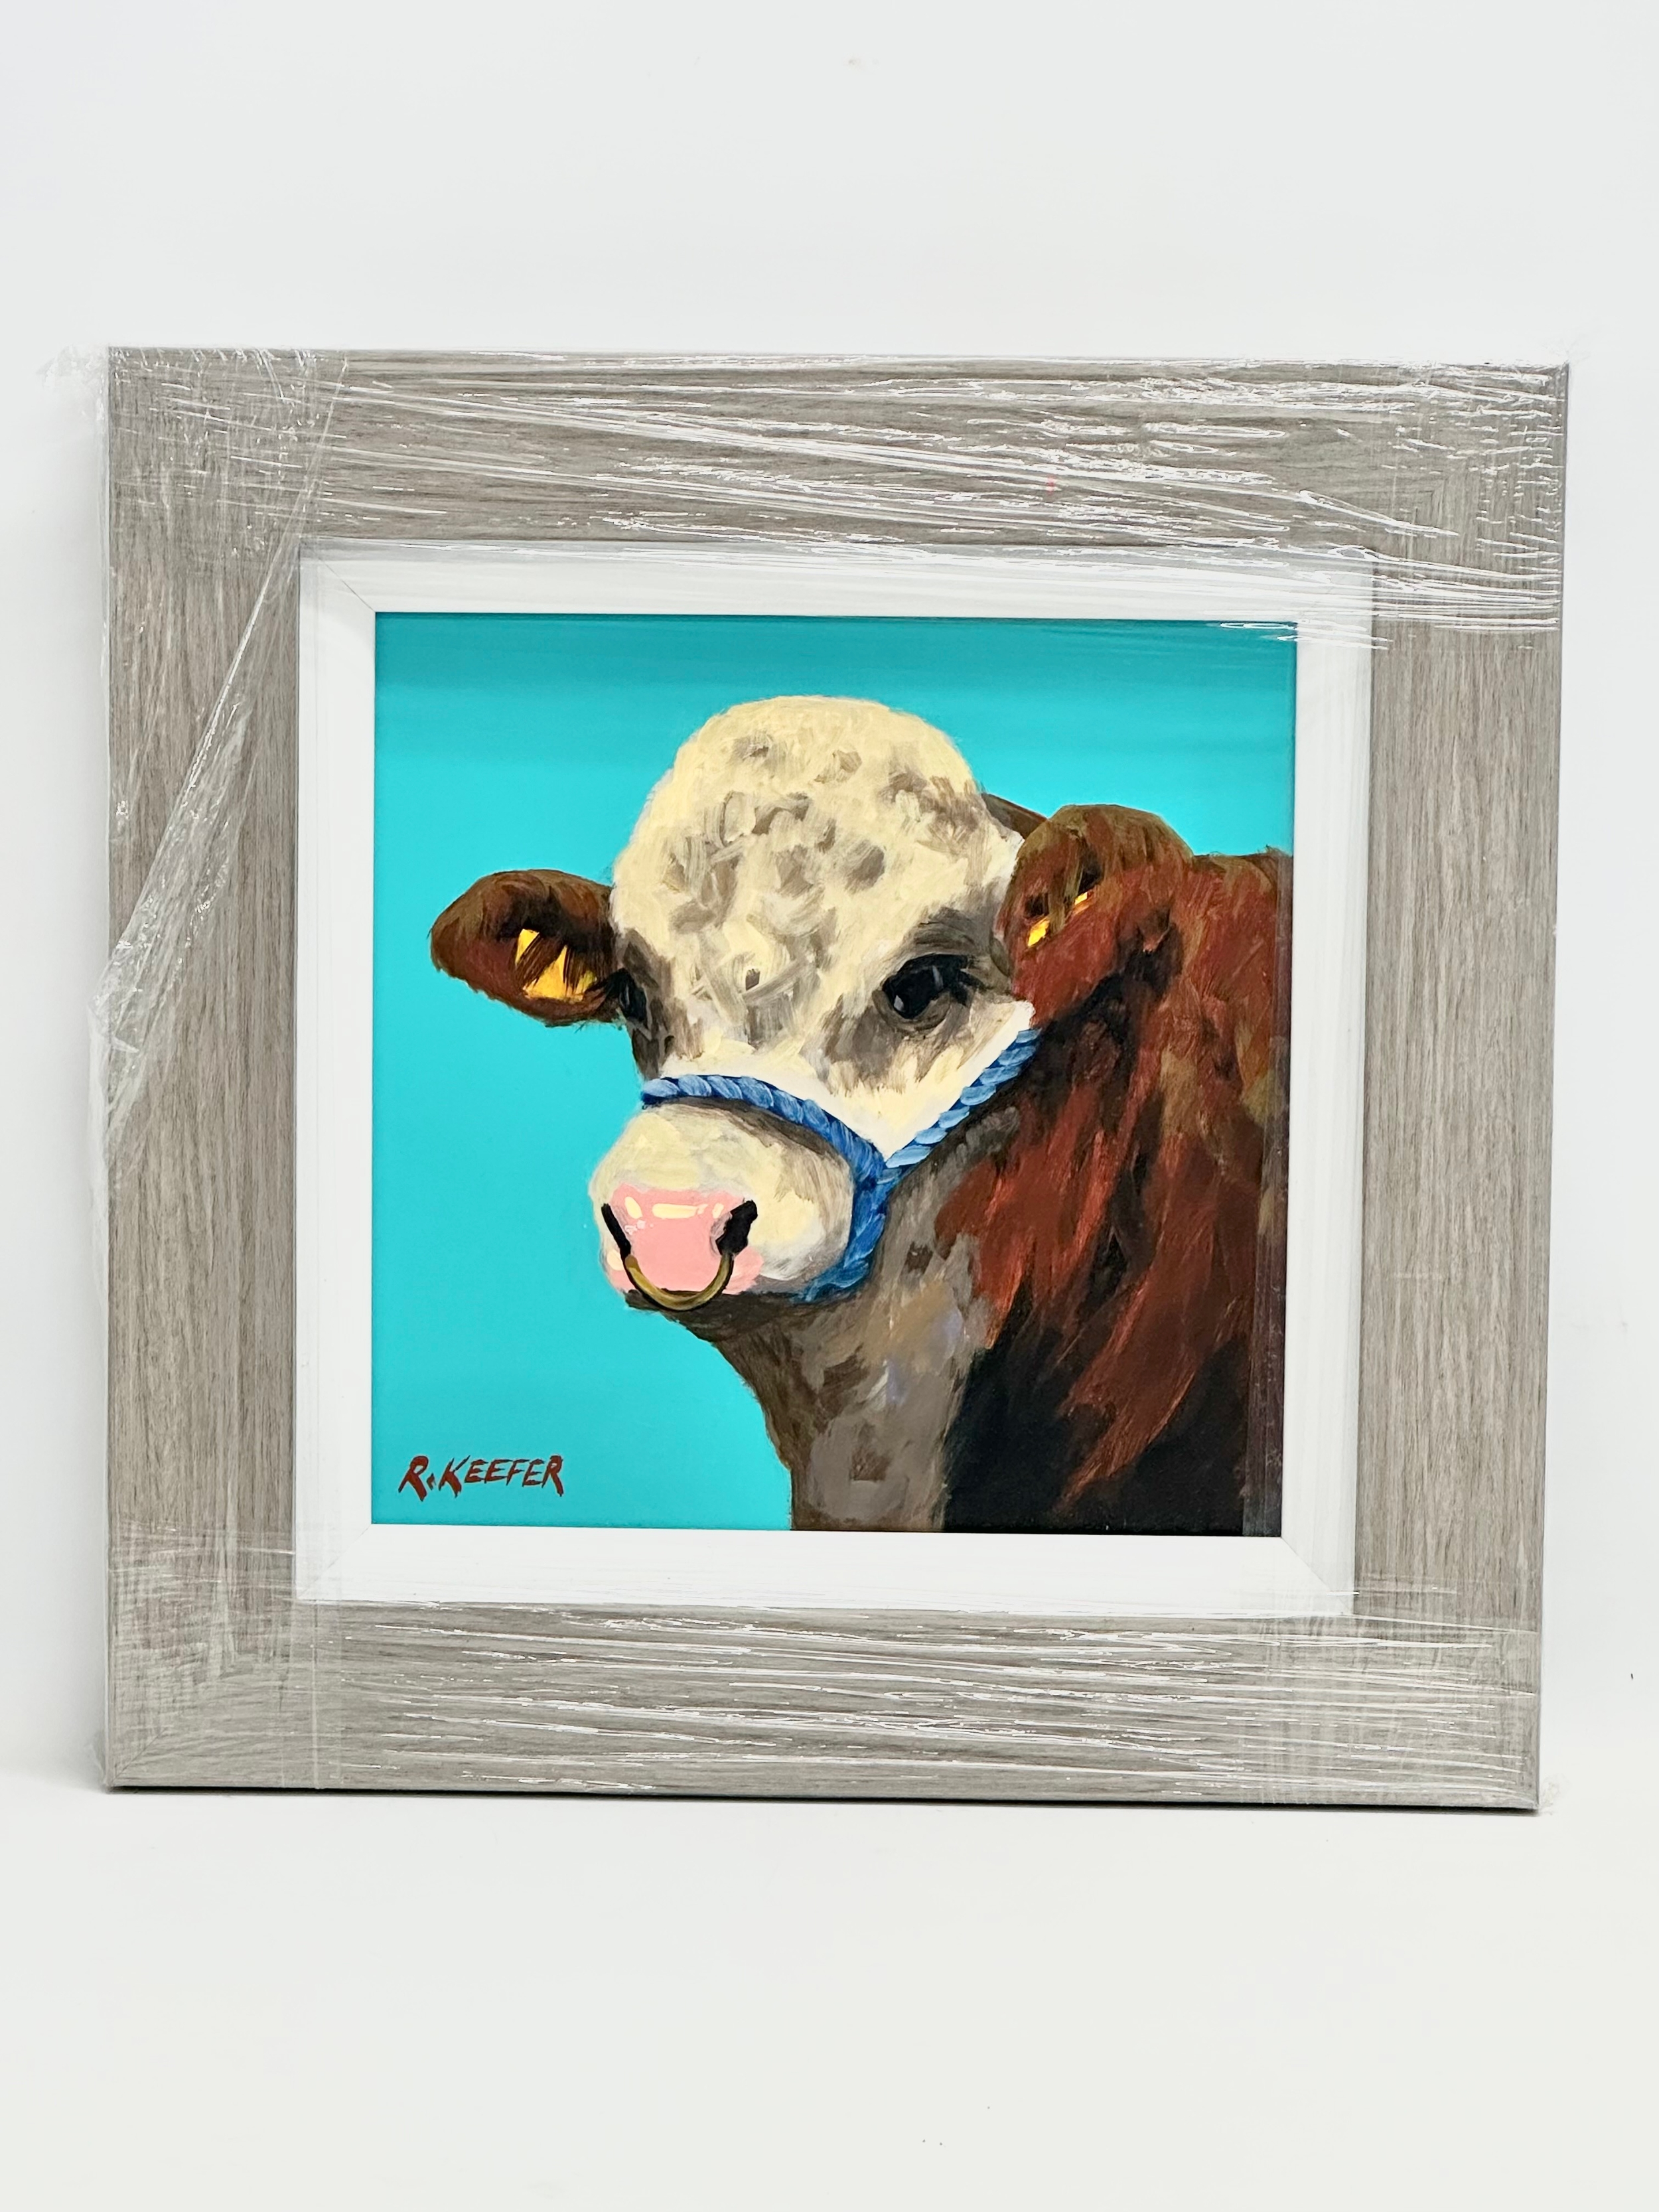 An oil painting on board by Ron Keefer. Turquoise Bull. 29.5x29.5cm. Frame 46x46cm